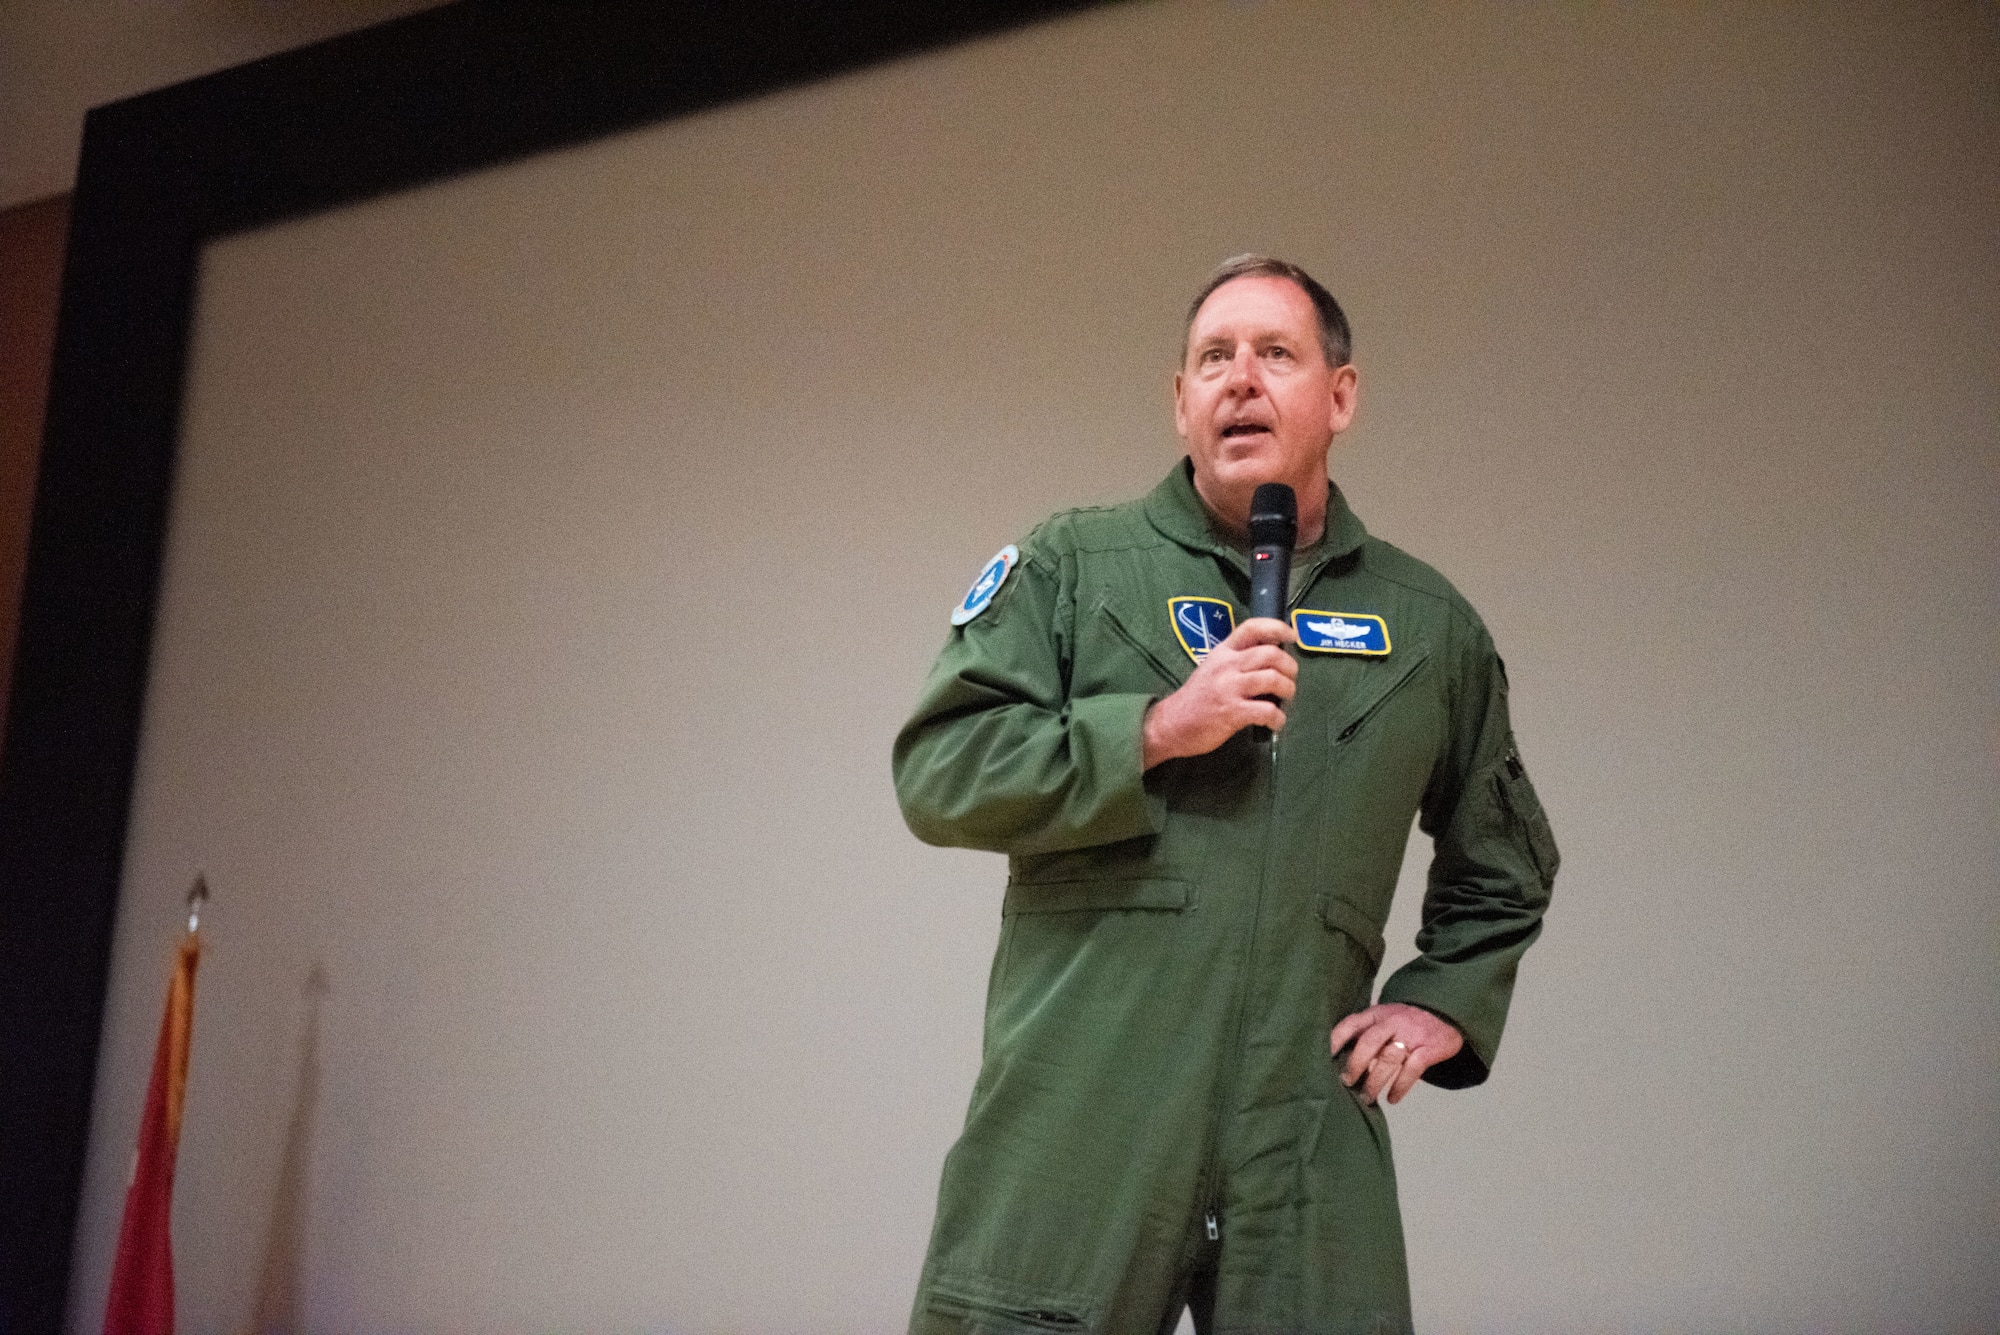 A man in a green flight suit speaks into a microphone.